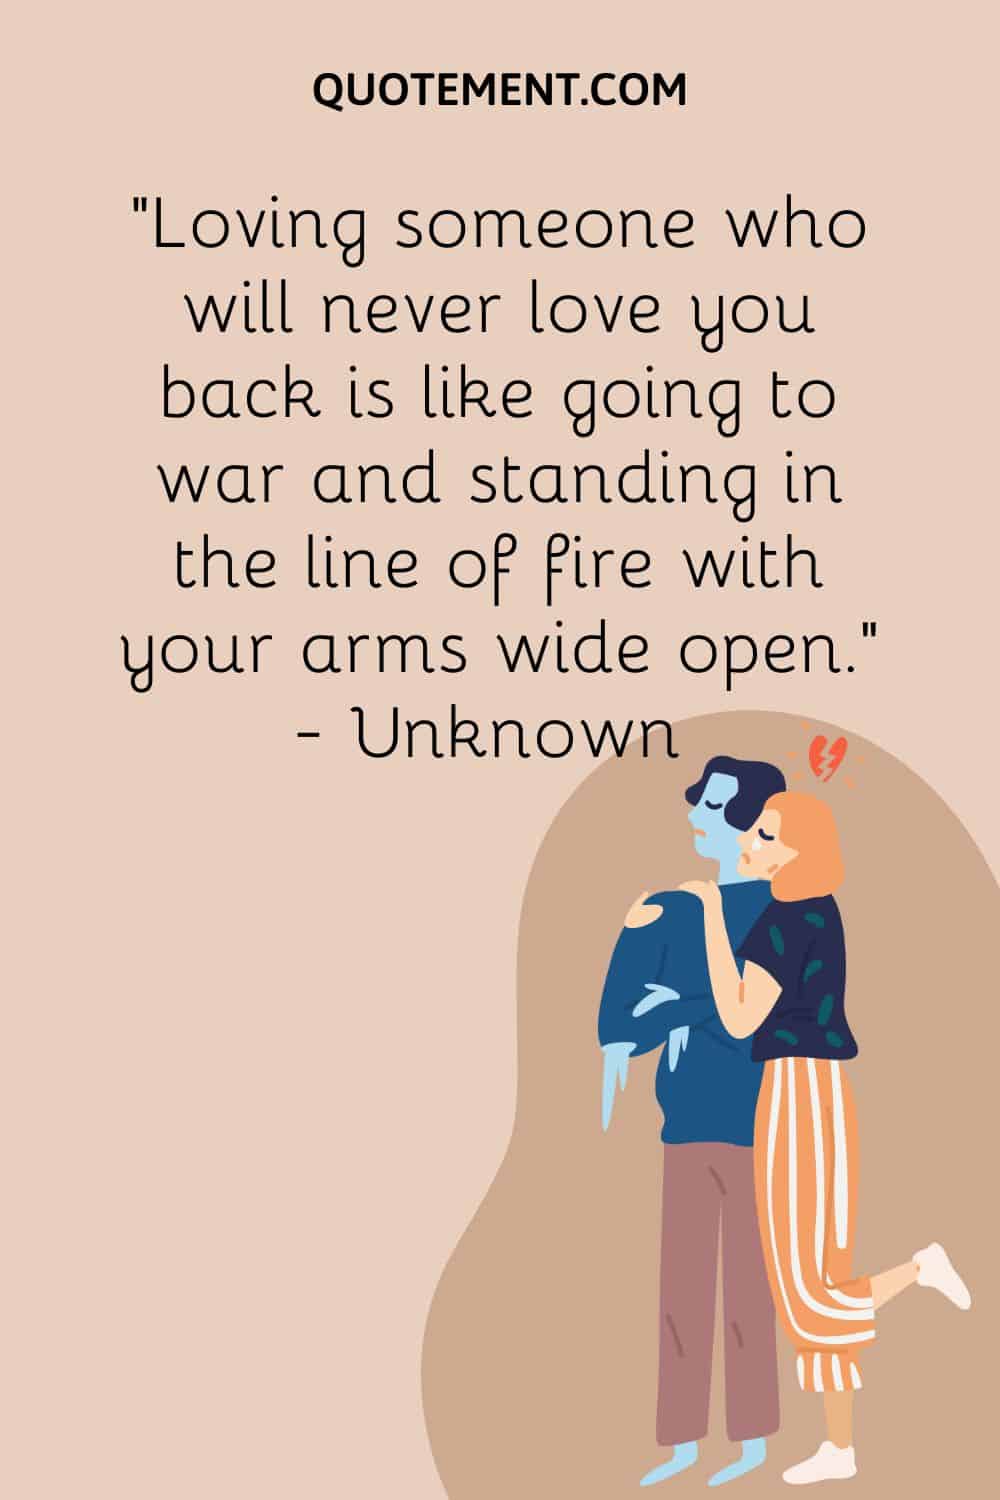 Loving someone who will never love you back is like going to war and standing in the line of fire with your arms wide open